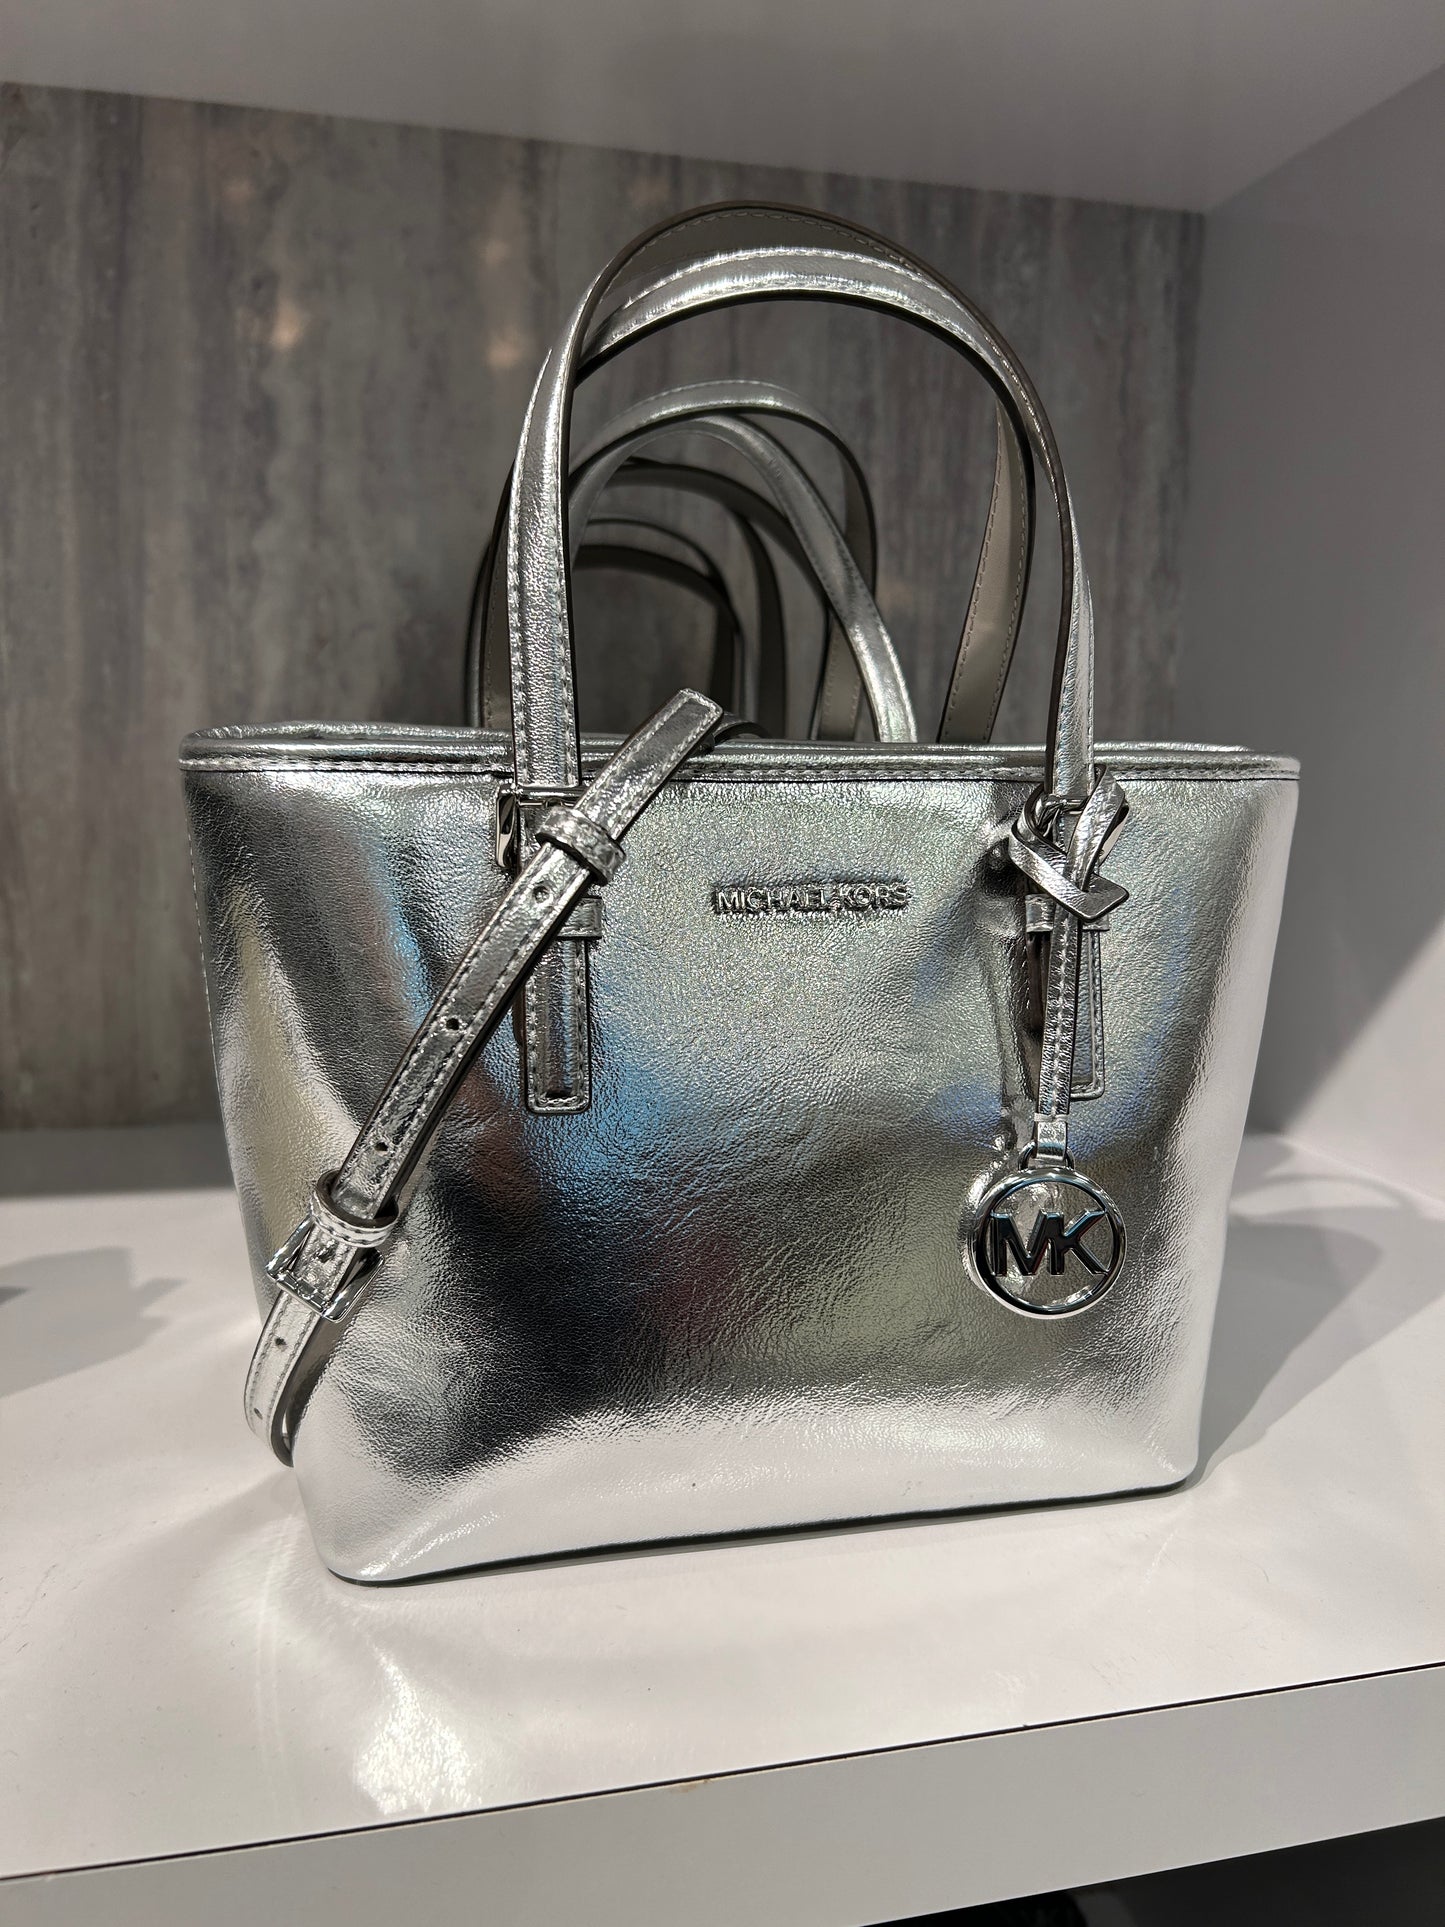 Load image into Gallery viewer, Michael Kors Jet Set Xs Carryall Tote In Metallic Silver (Pre-Order)
